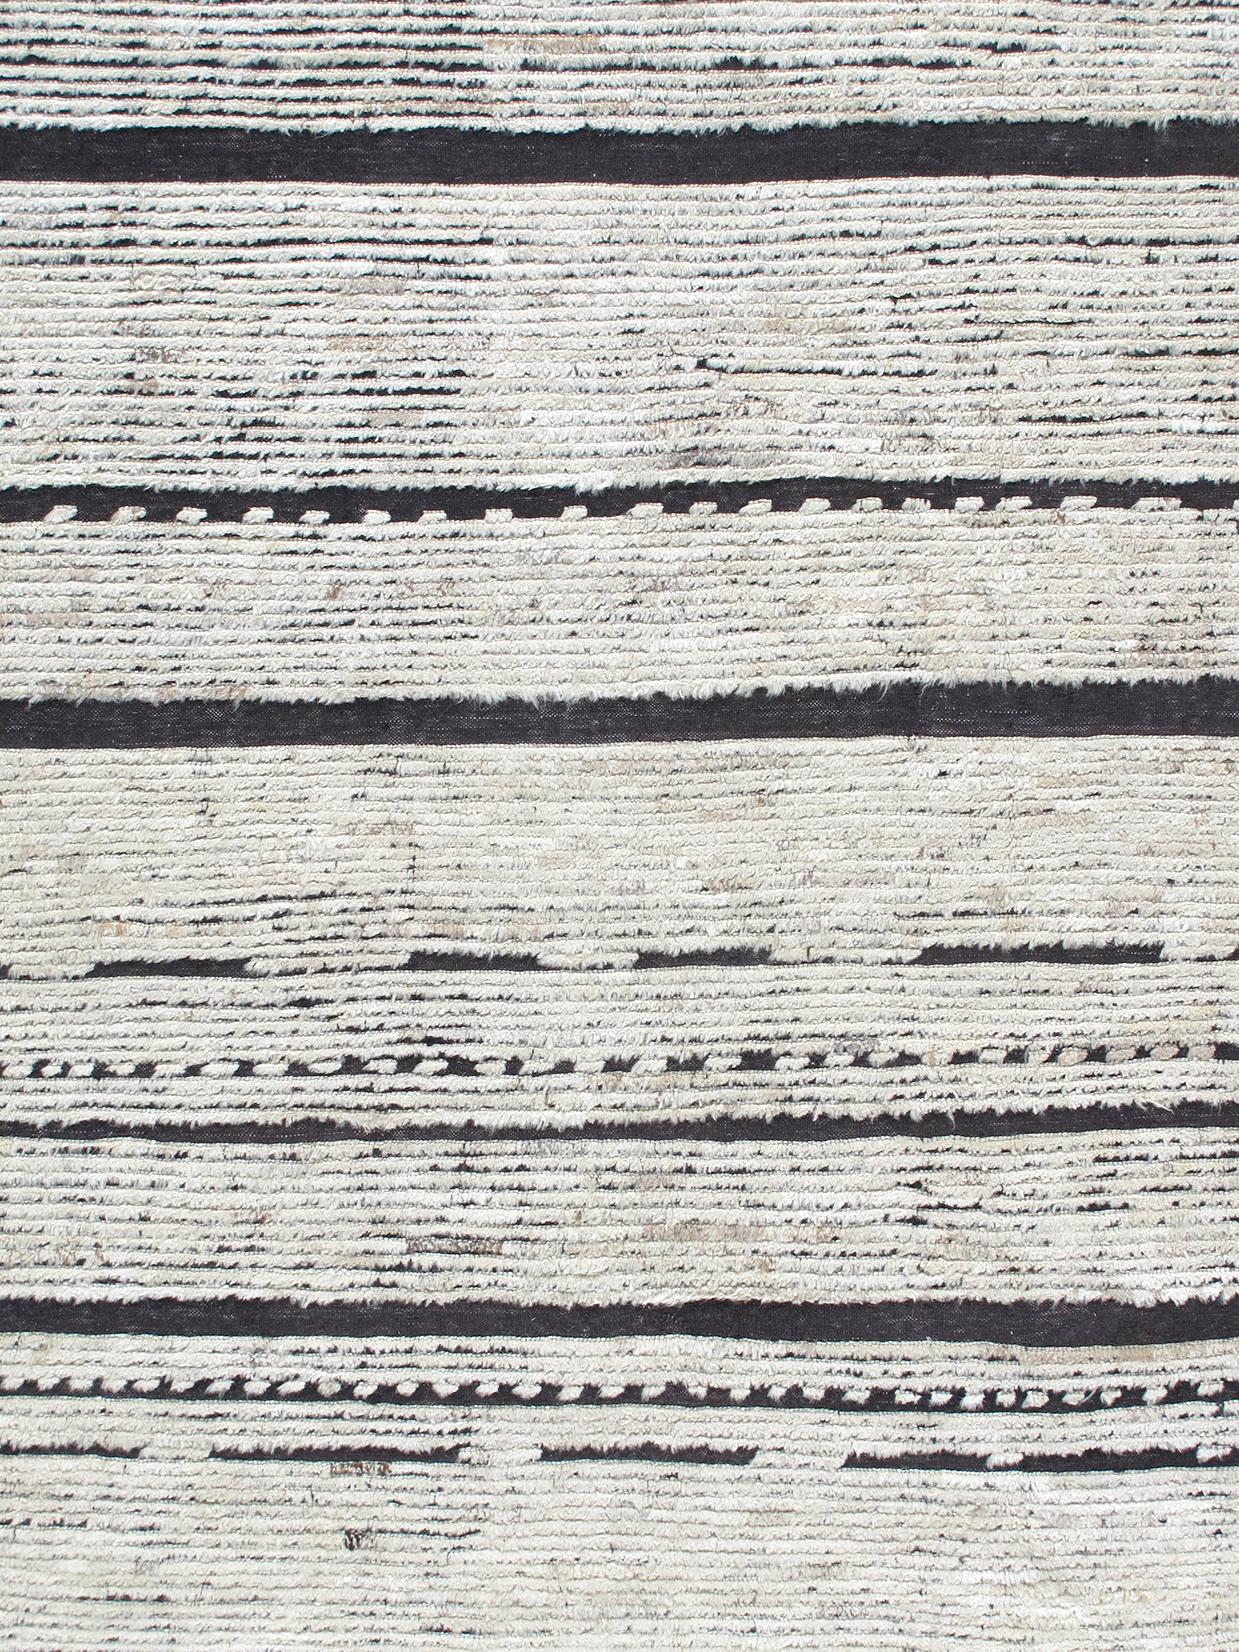 Our African rug is handknotted from the finest, hand-spun, naturally dyed wool. The black and beige modern design is both contemporary and traditional making it extremely versatile. Custom sizes and colors available upon request.